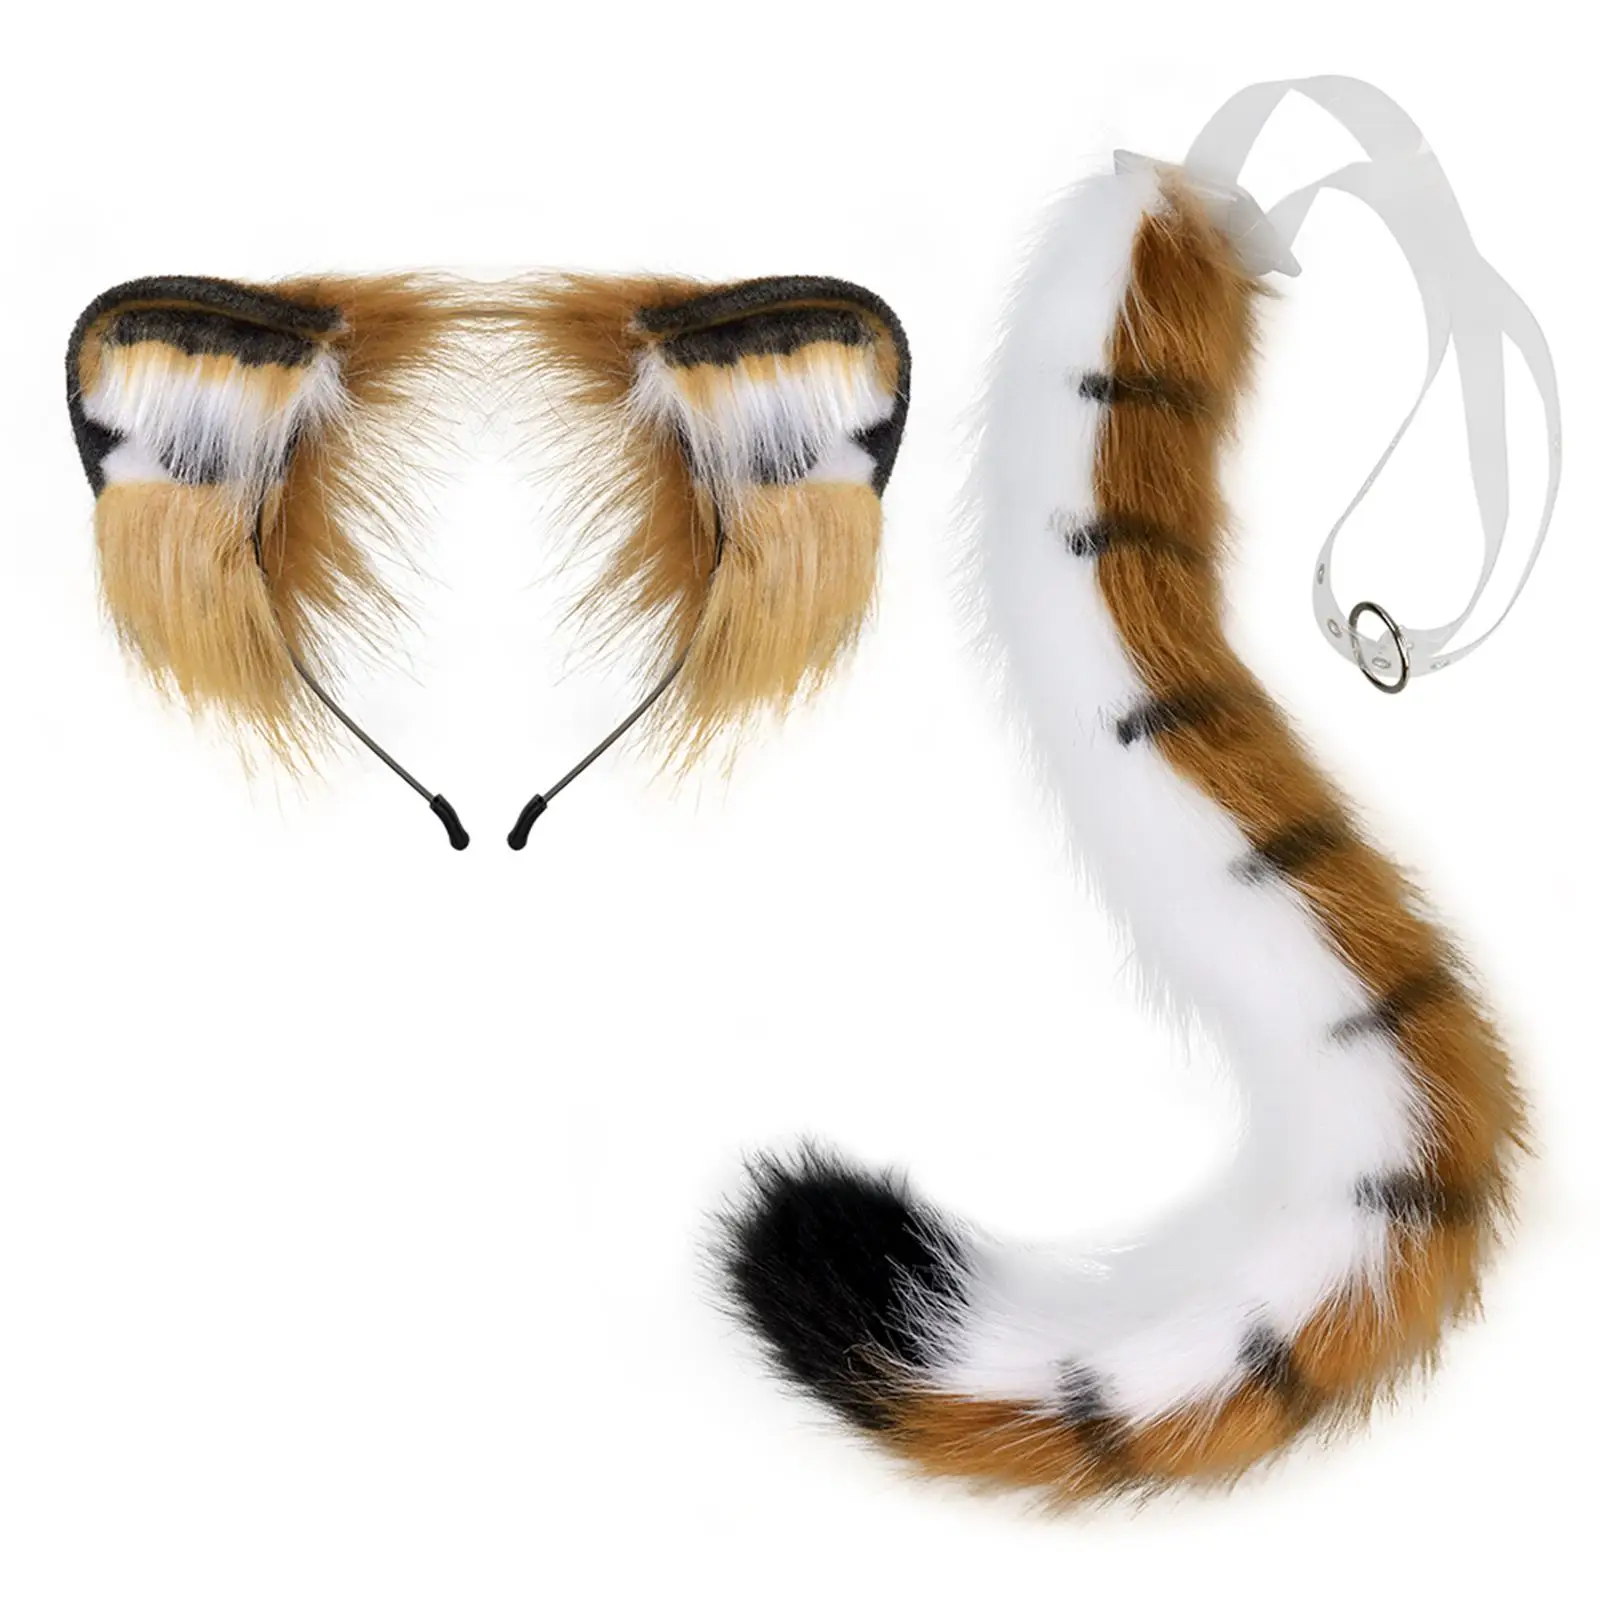 Tiger Ears and Tail Set Tiger Long Tail Cosplay Animal Themed Parties Hair Hoop Headband for Birthday Prom Stage Performance